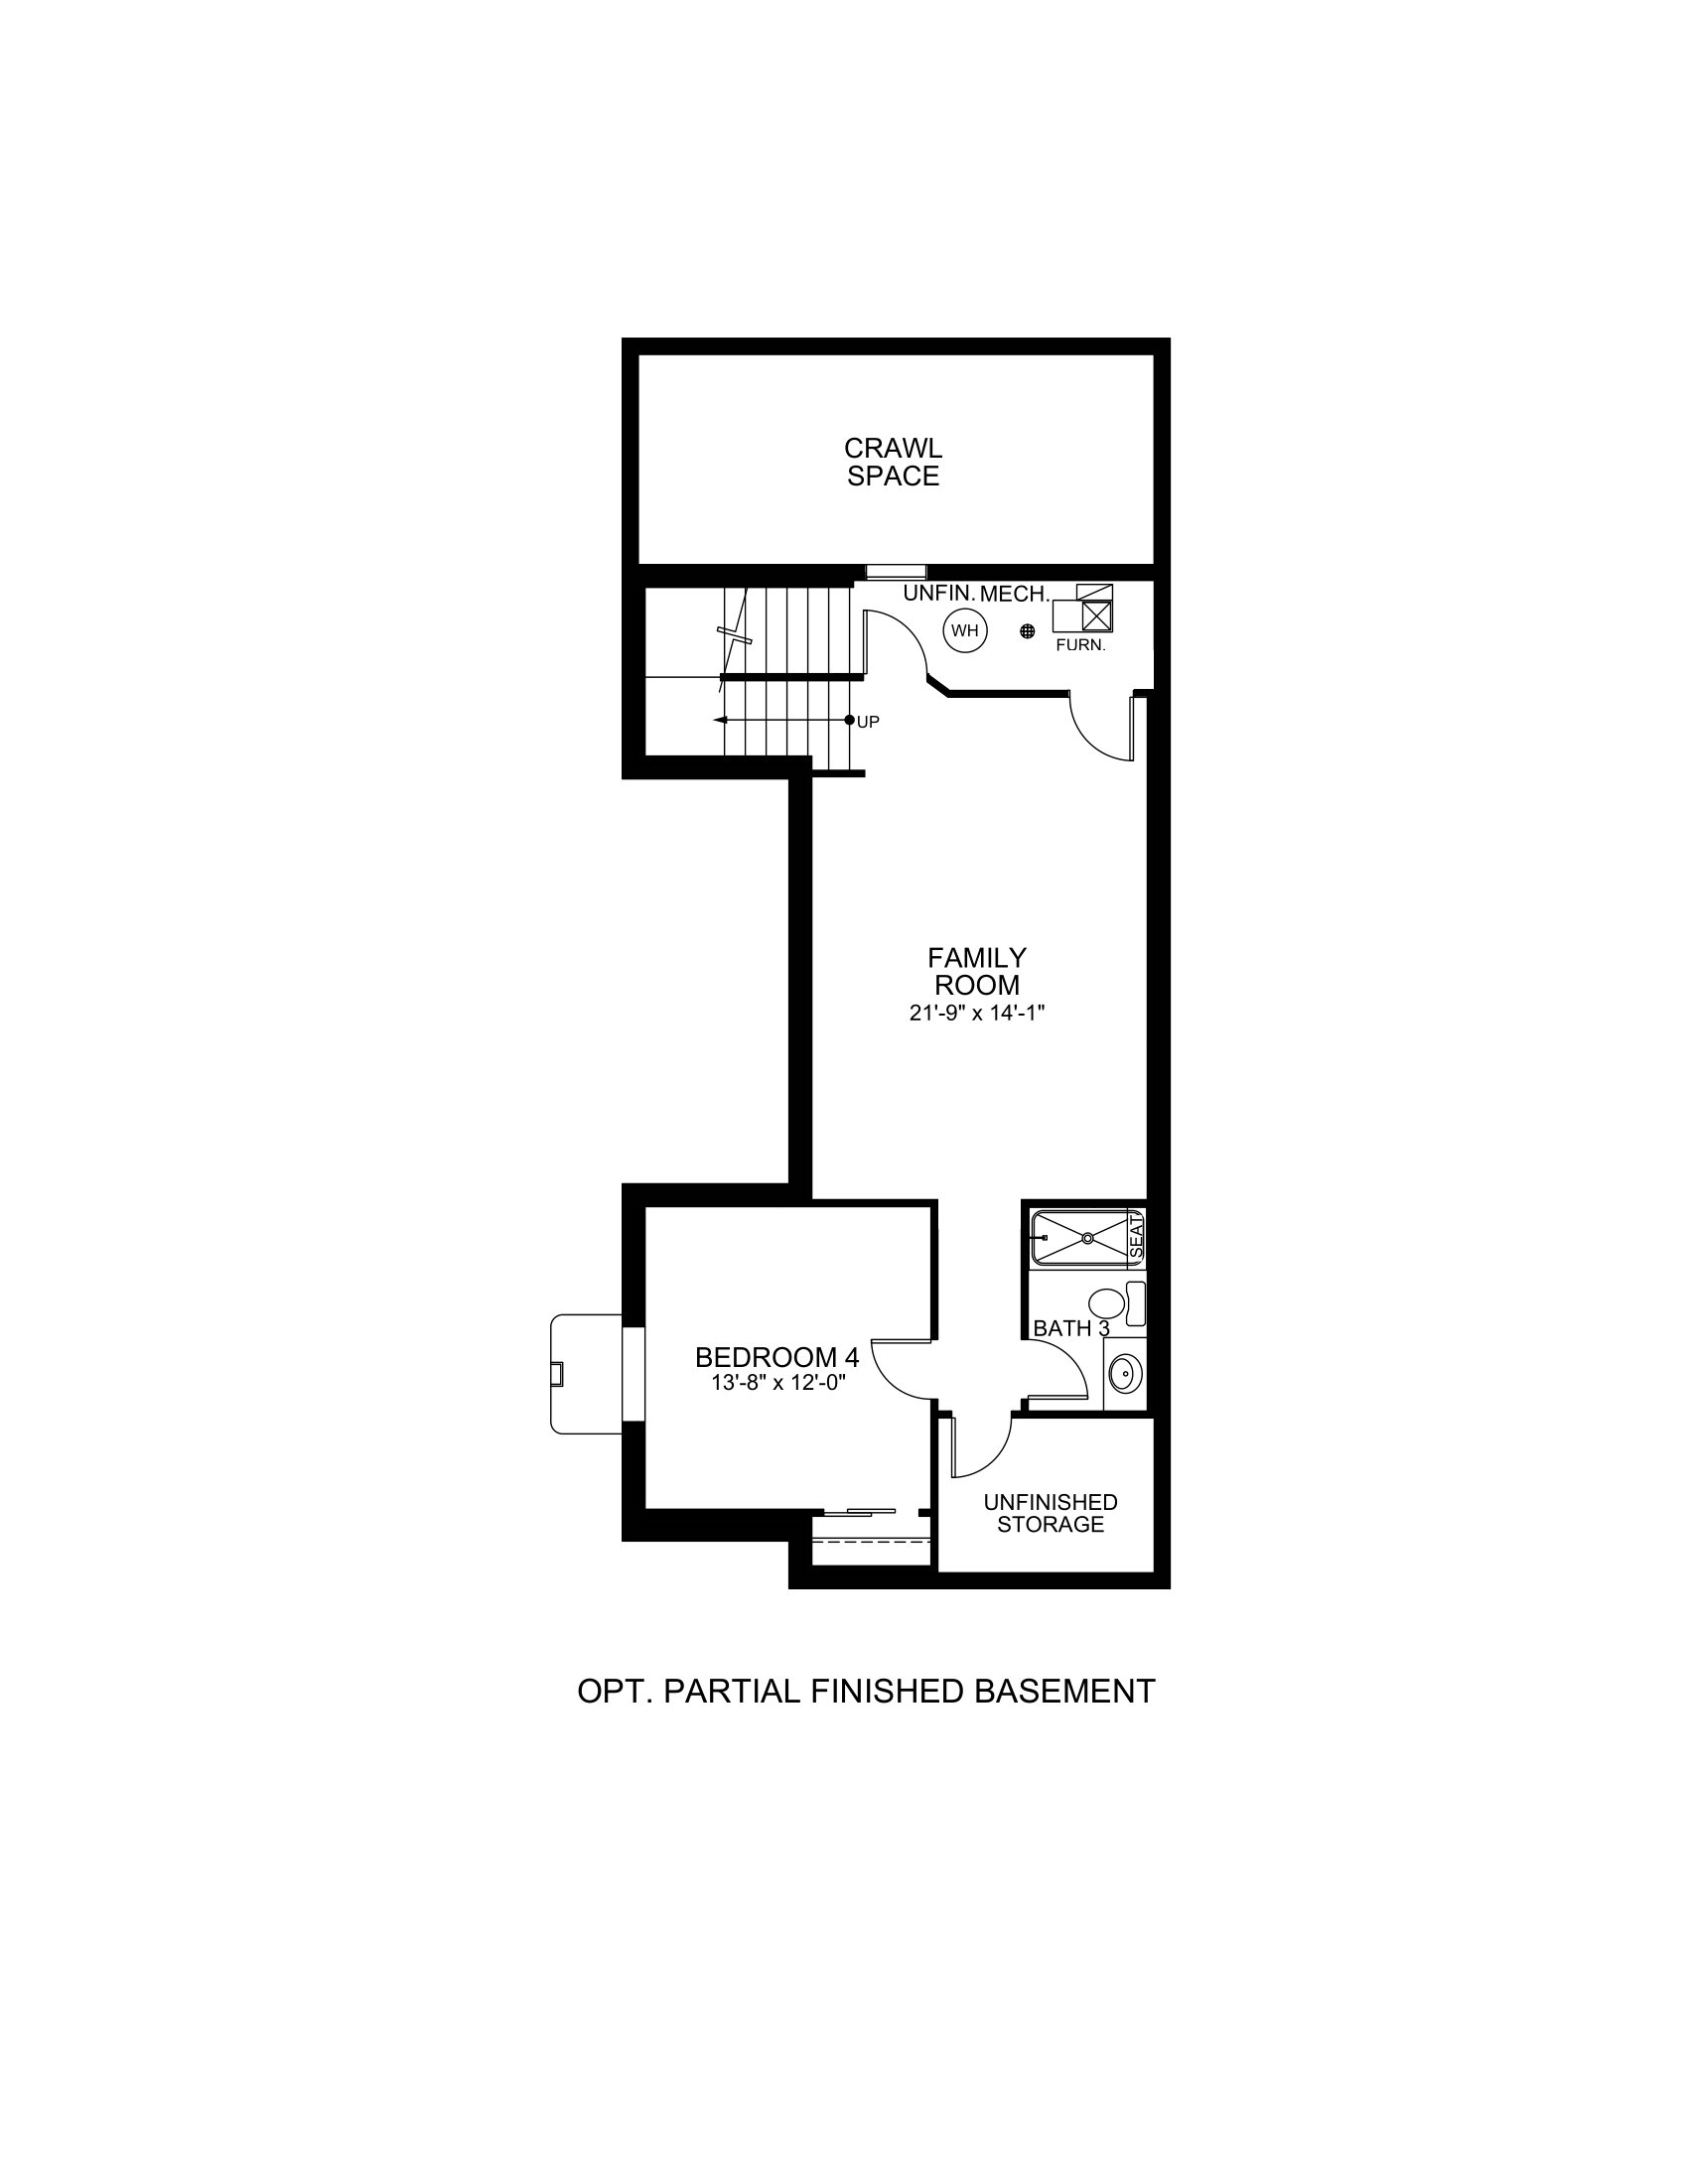 Optional Partial Finished Basement